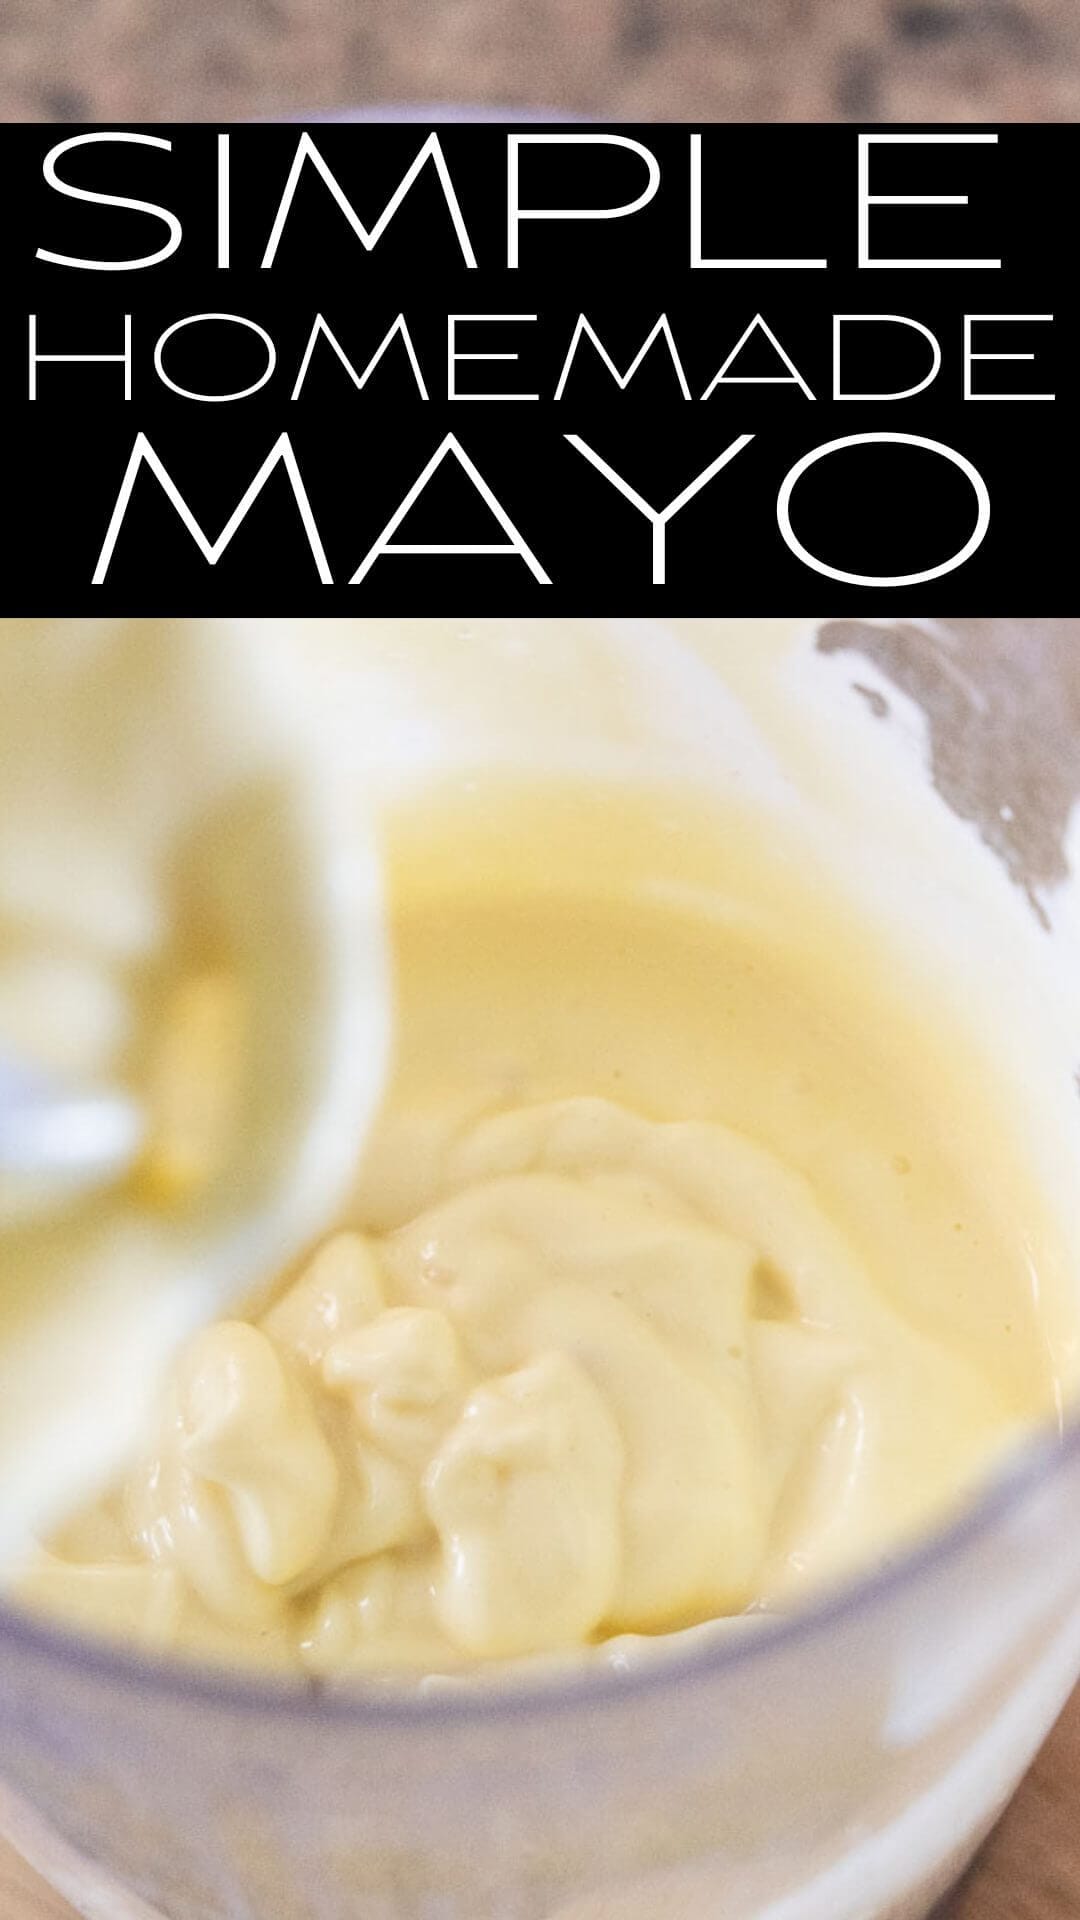 How to make homemade mayonnaise using simple ingredients you have at home. You will never go back to store bought.